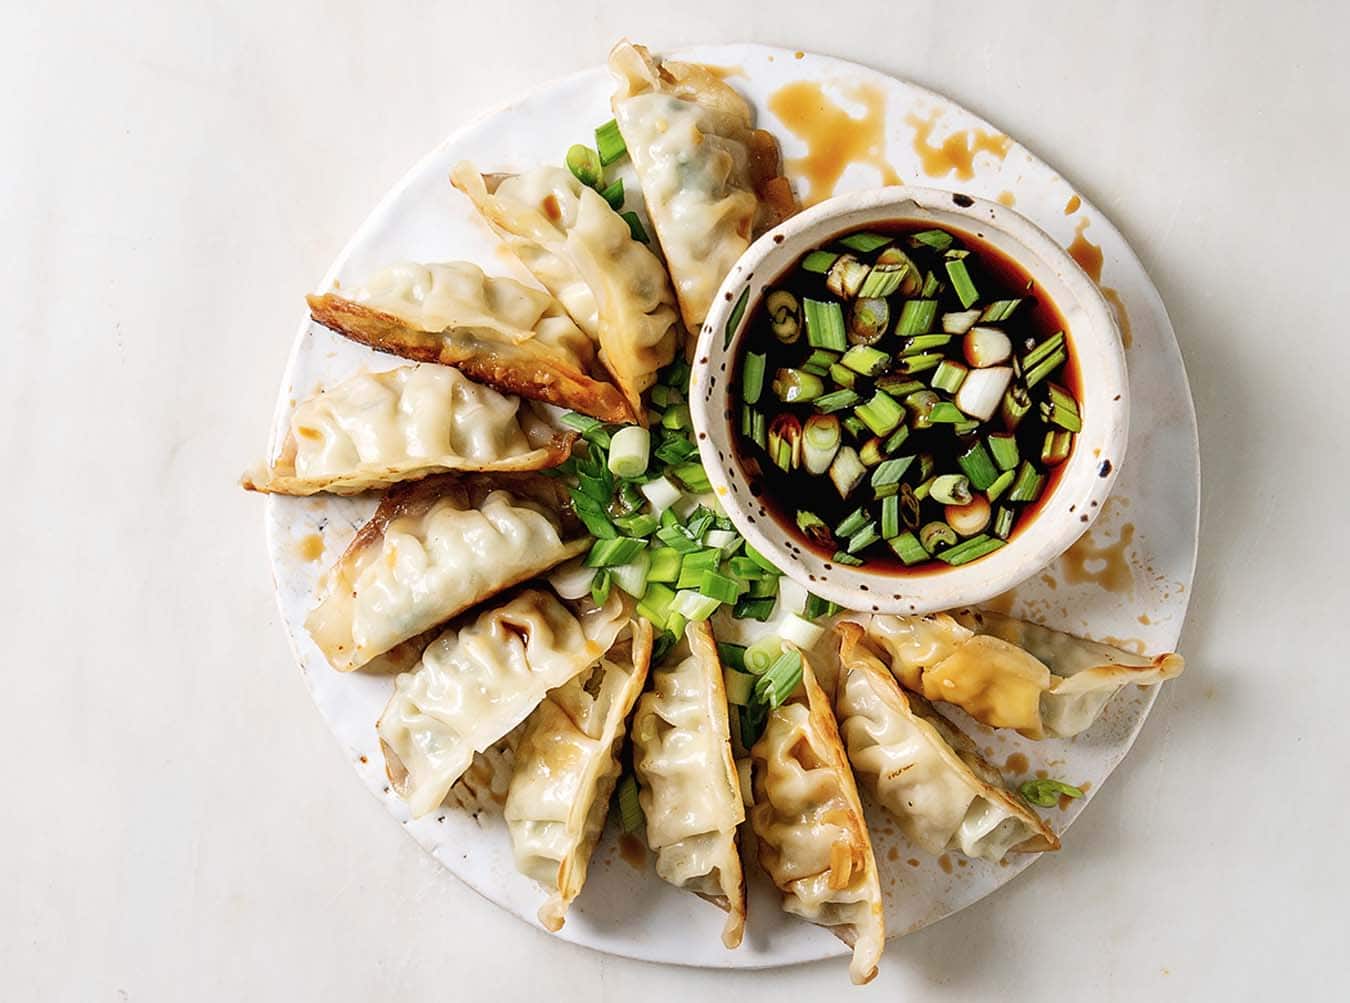 Crispy potstickers cooked in an air fryer are one of the tastiest appetizers or snacks around.